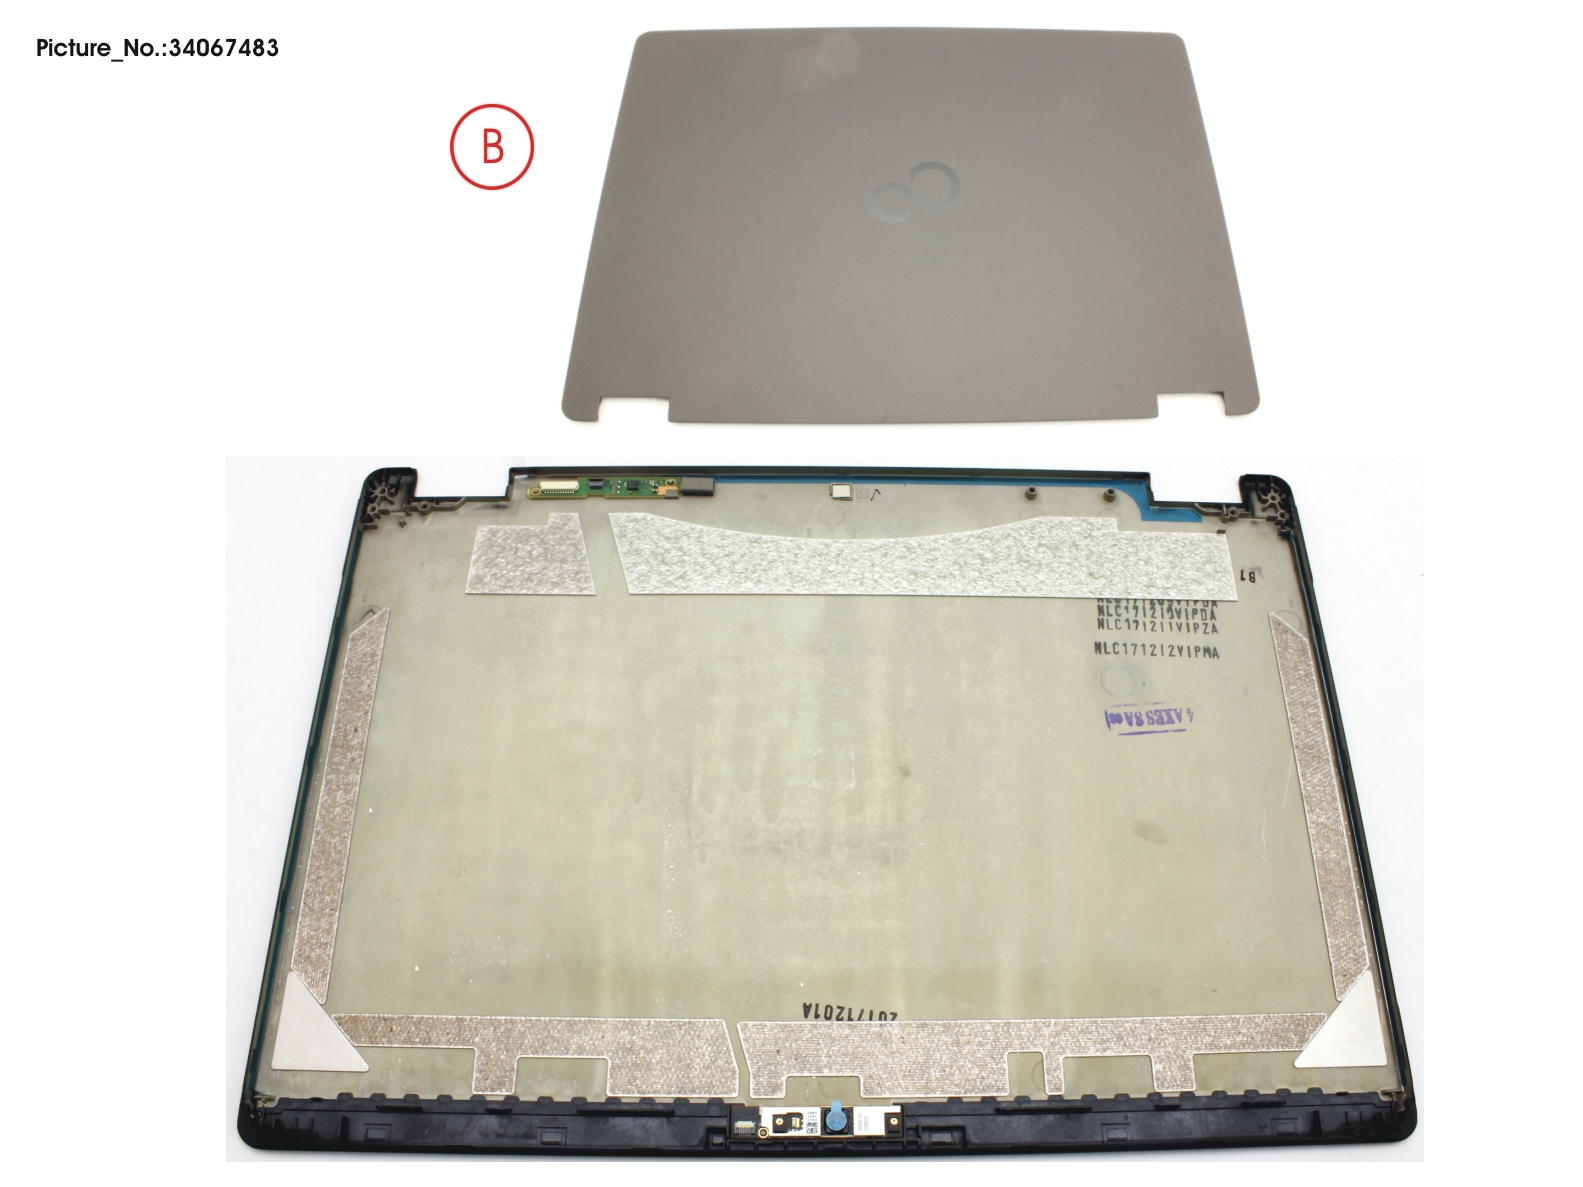 LCD BACK COVER ASSY (FOR HD)